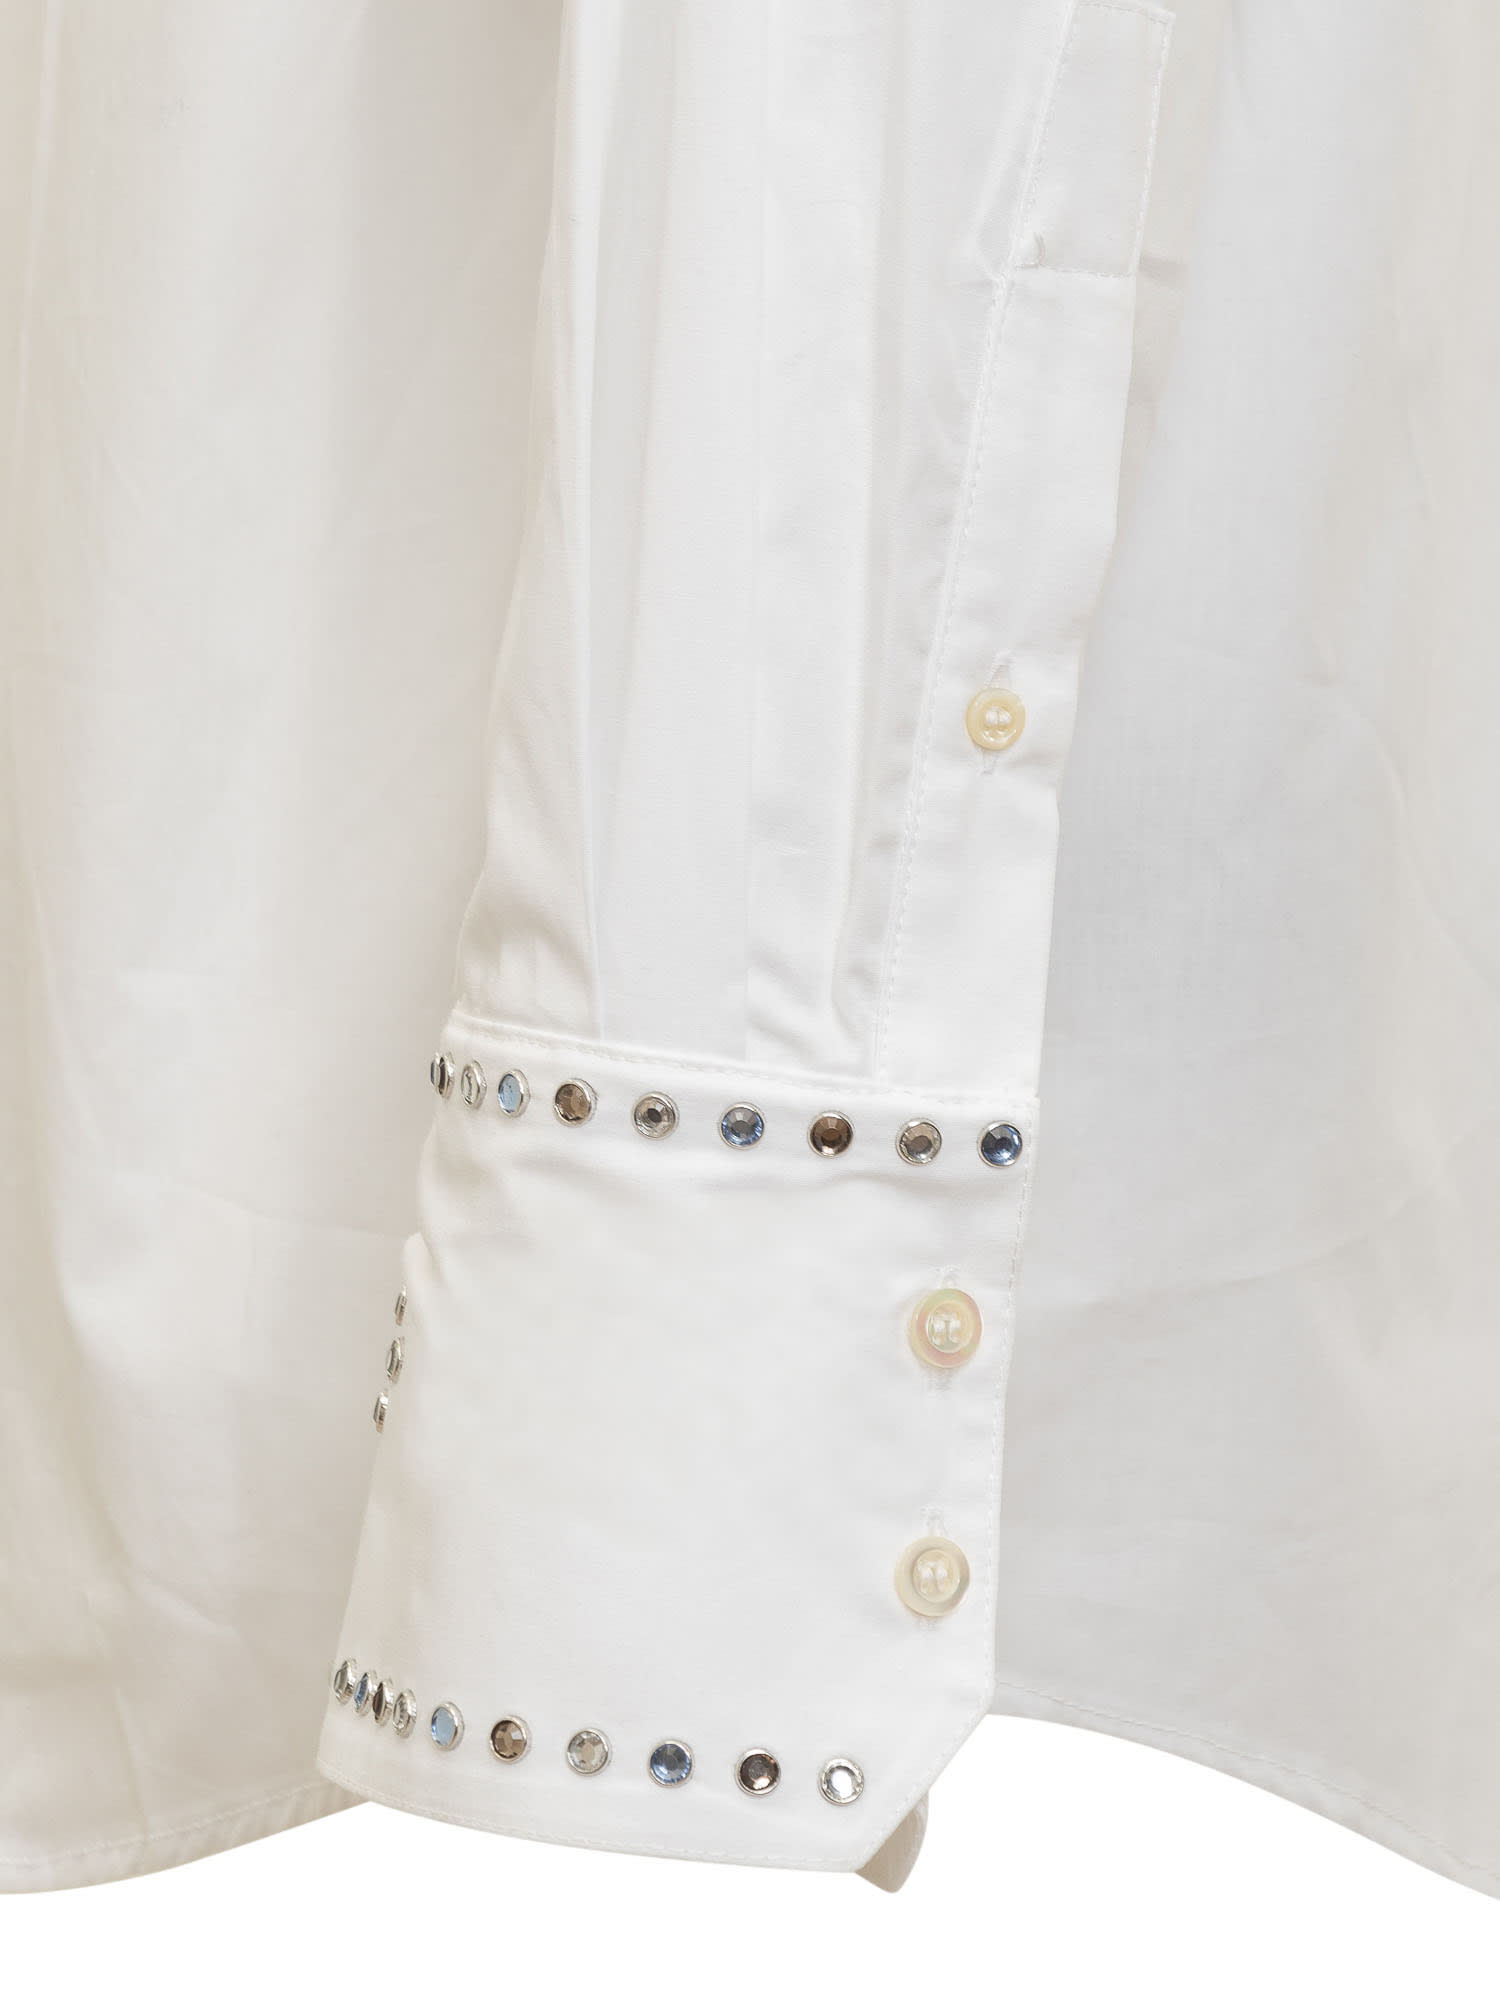 Shop Bluemarble Shirt With Rhinestones In White